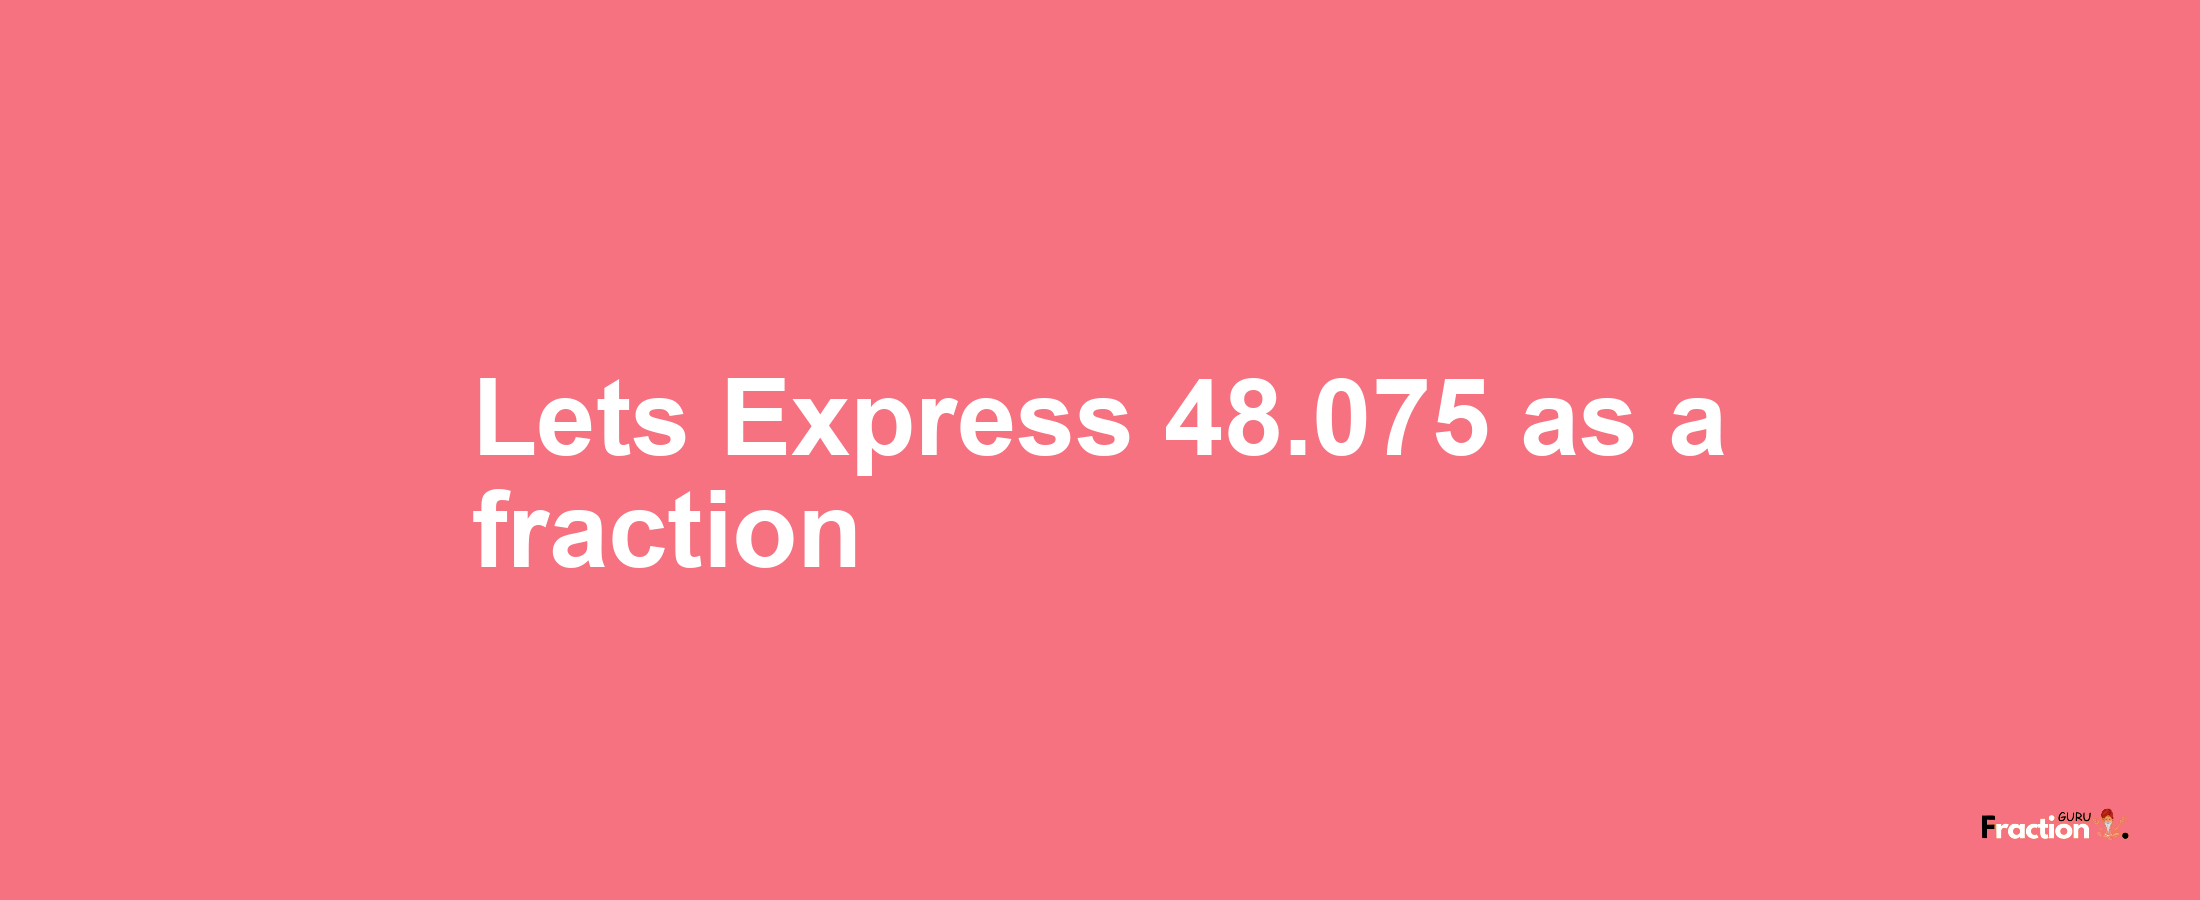 Lets Express 48.075 as afraction